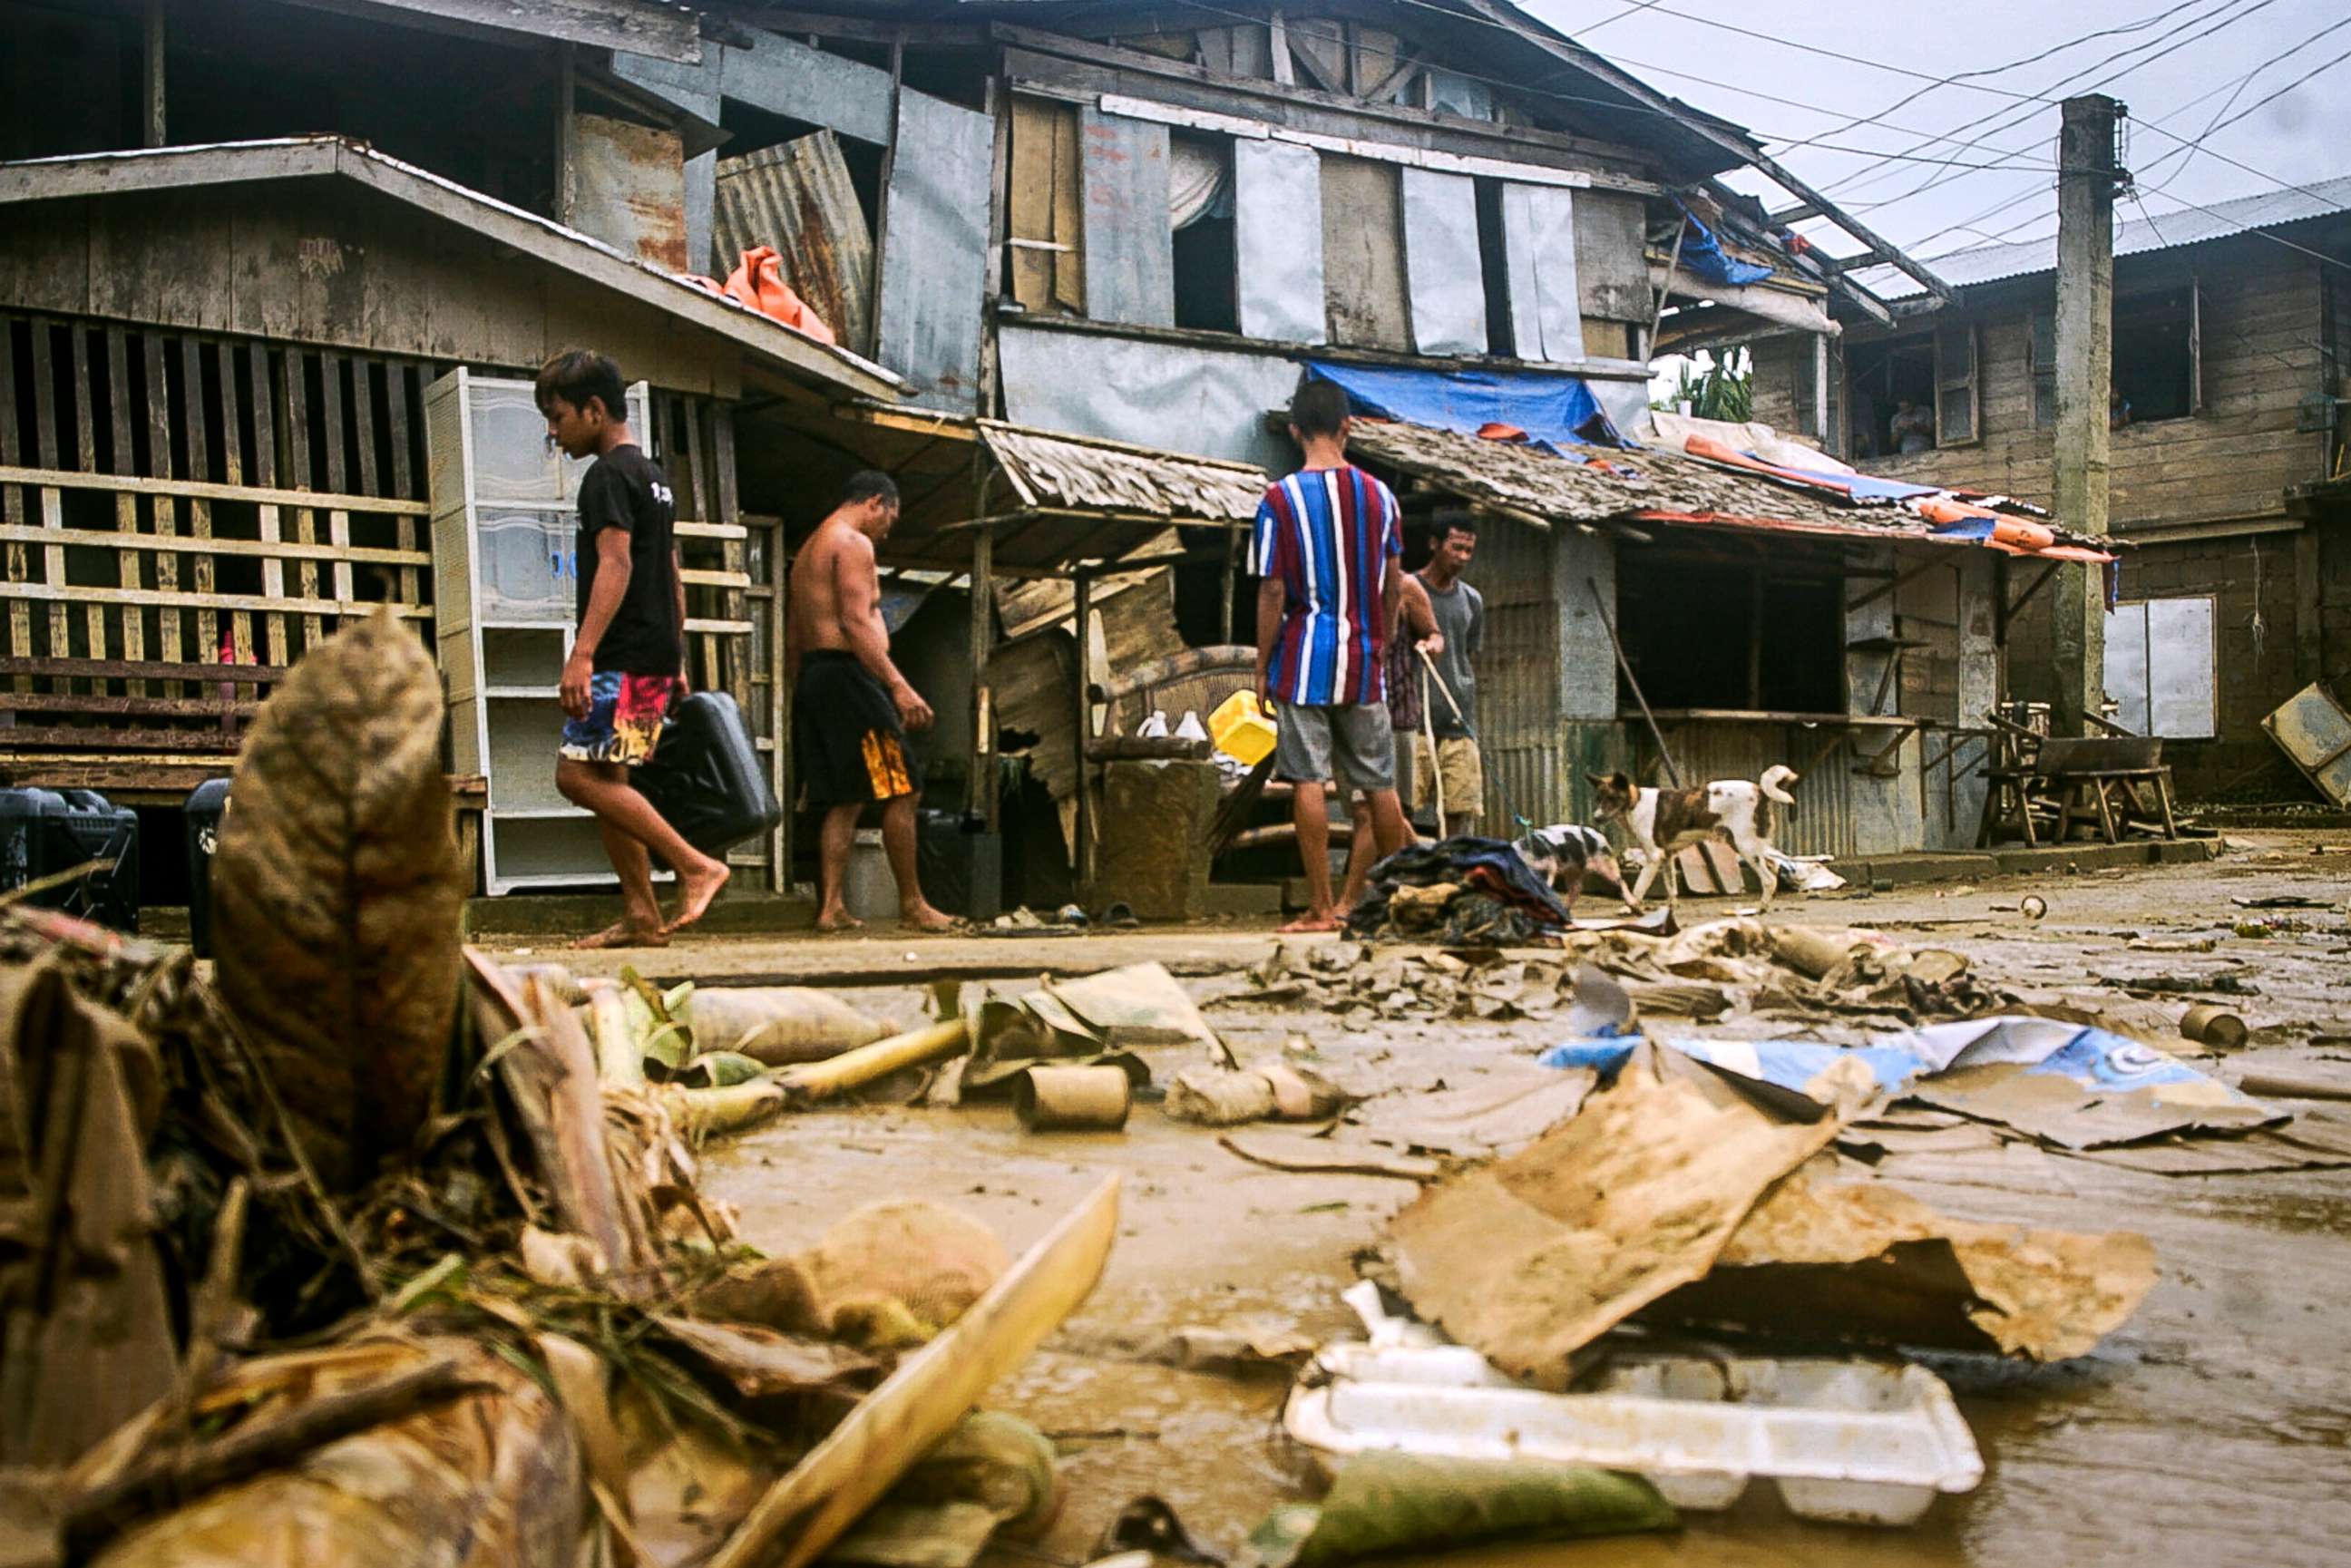 PHOTO: Residents clean out debris from floods caused by Typhoon Surigae in Arteche, Eastern Samar, eastern Philippines, April 20, 2021.